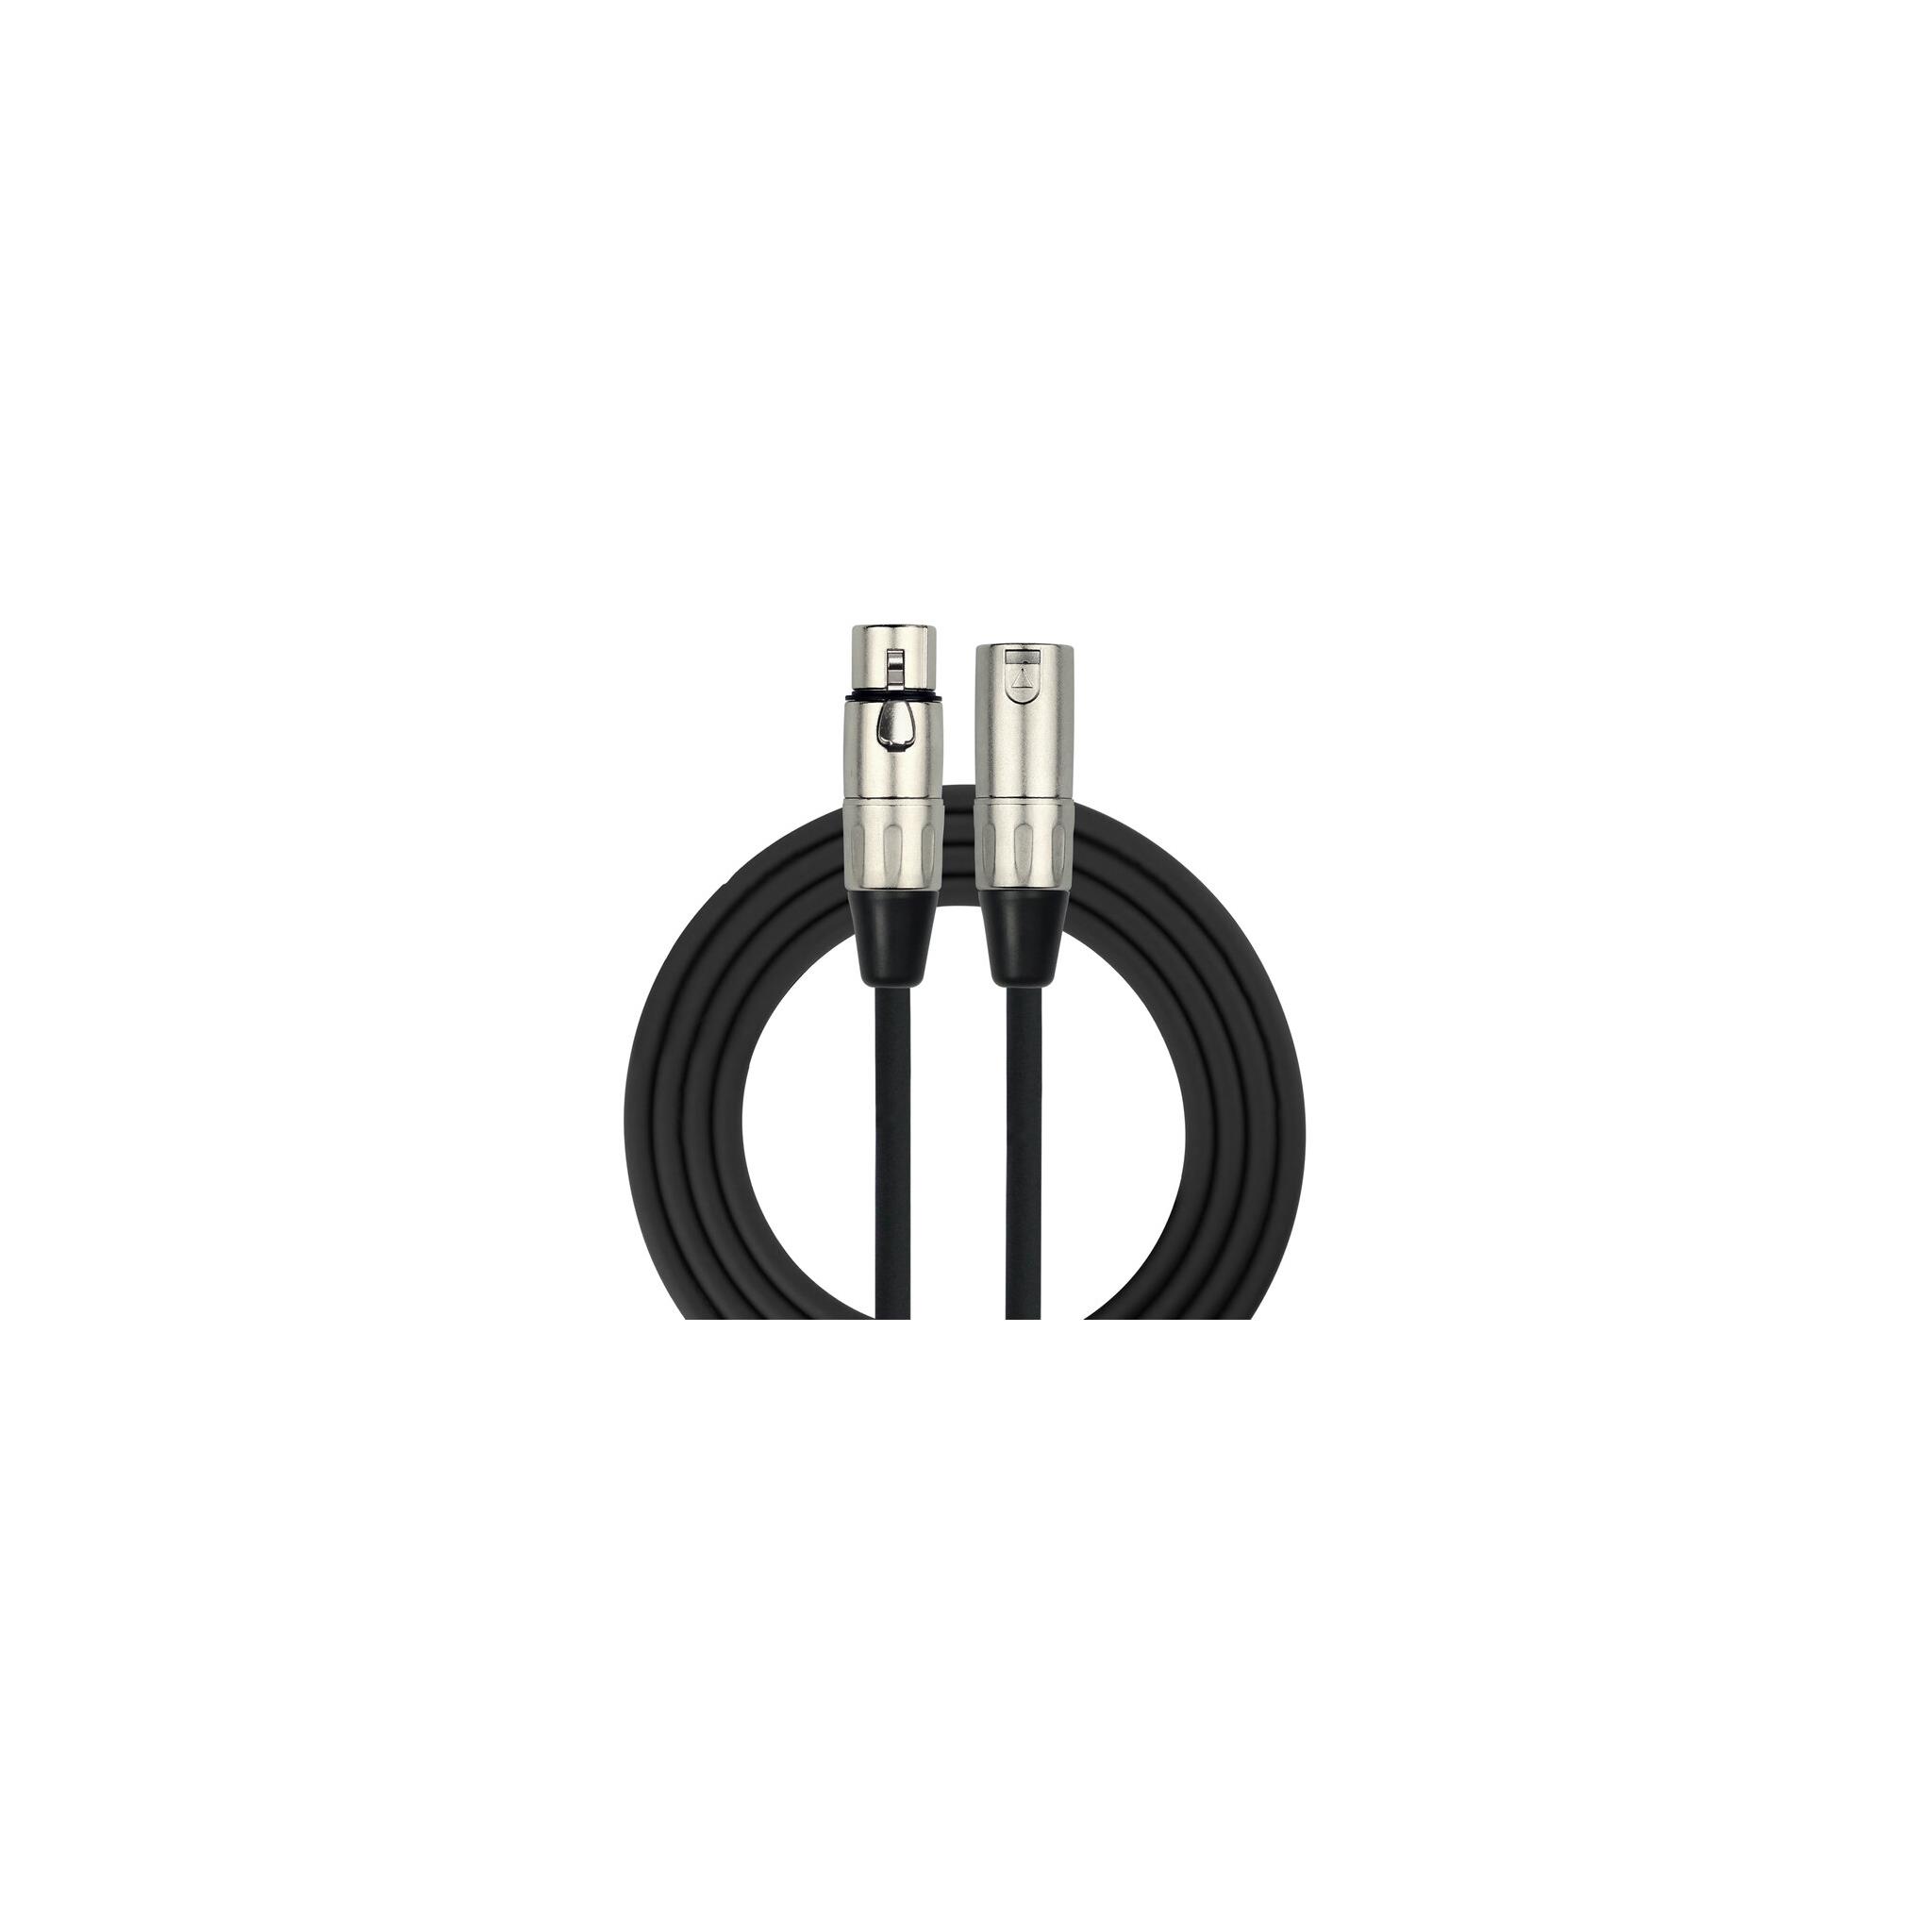 Kirlin 15" XLR Cable